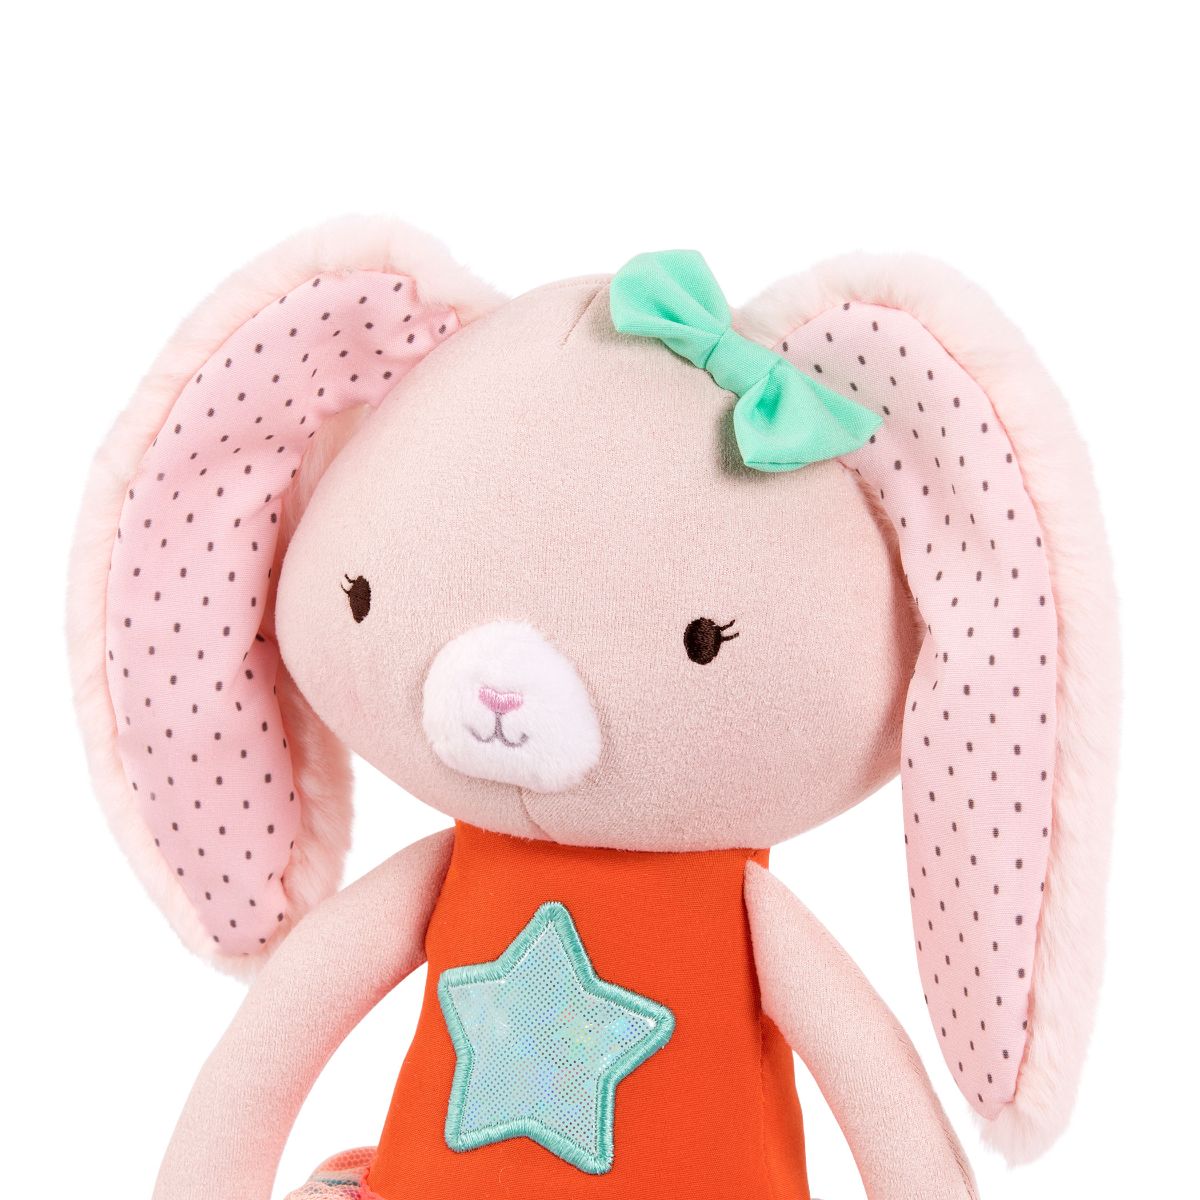 Tippy Toes – Becky Bunny Designer